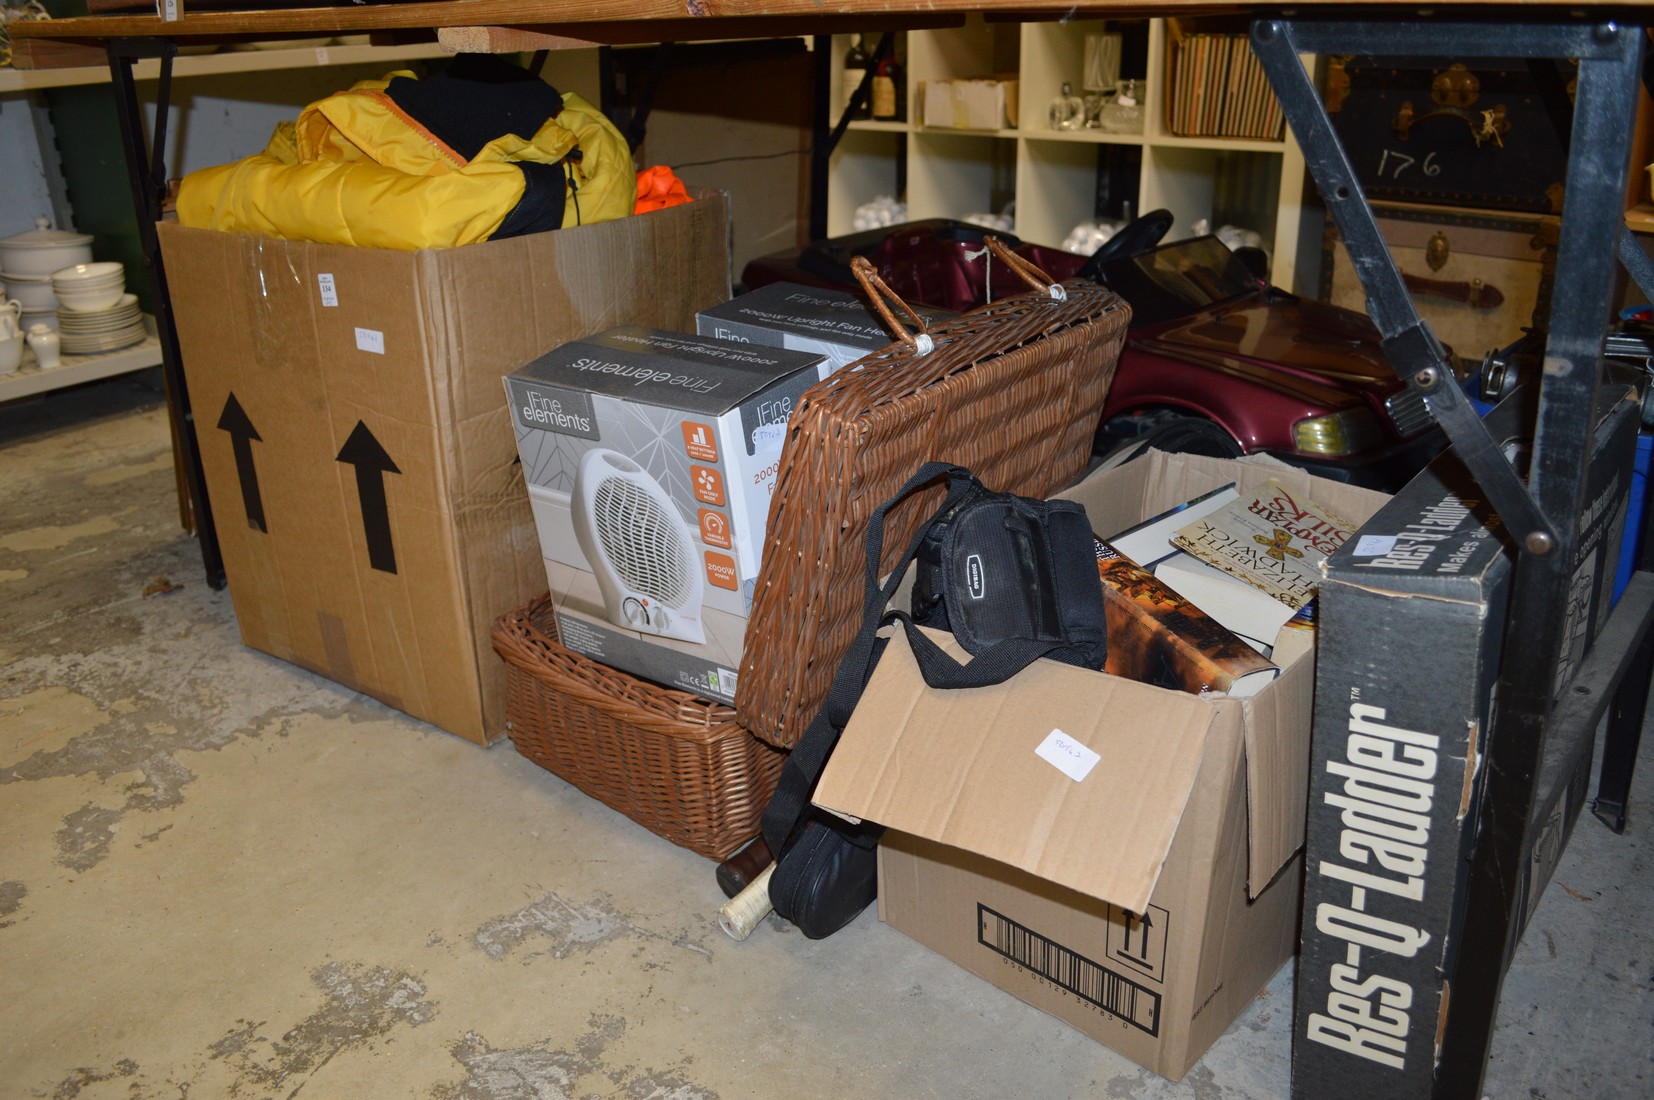 Household miscellaneous to include waterproof clothing, electric fan heaters, books etc.